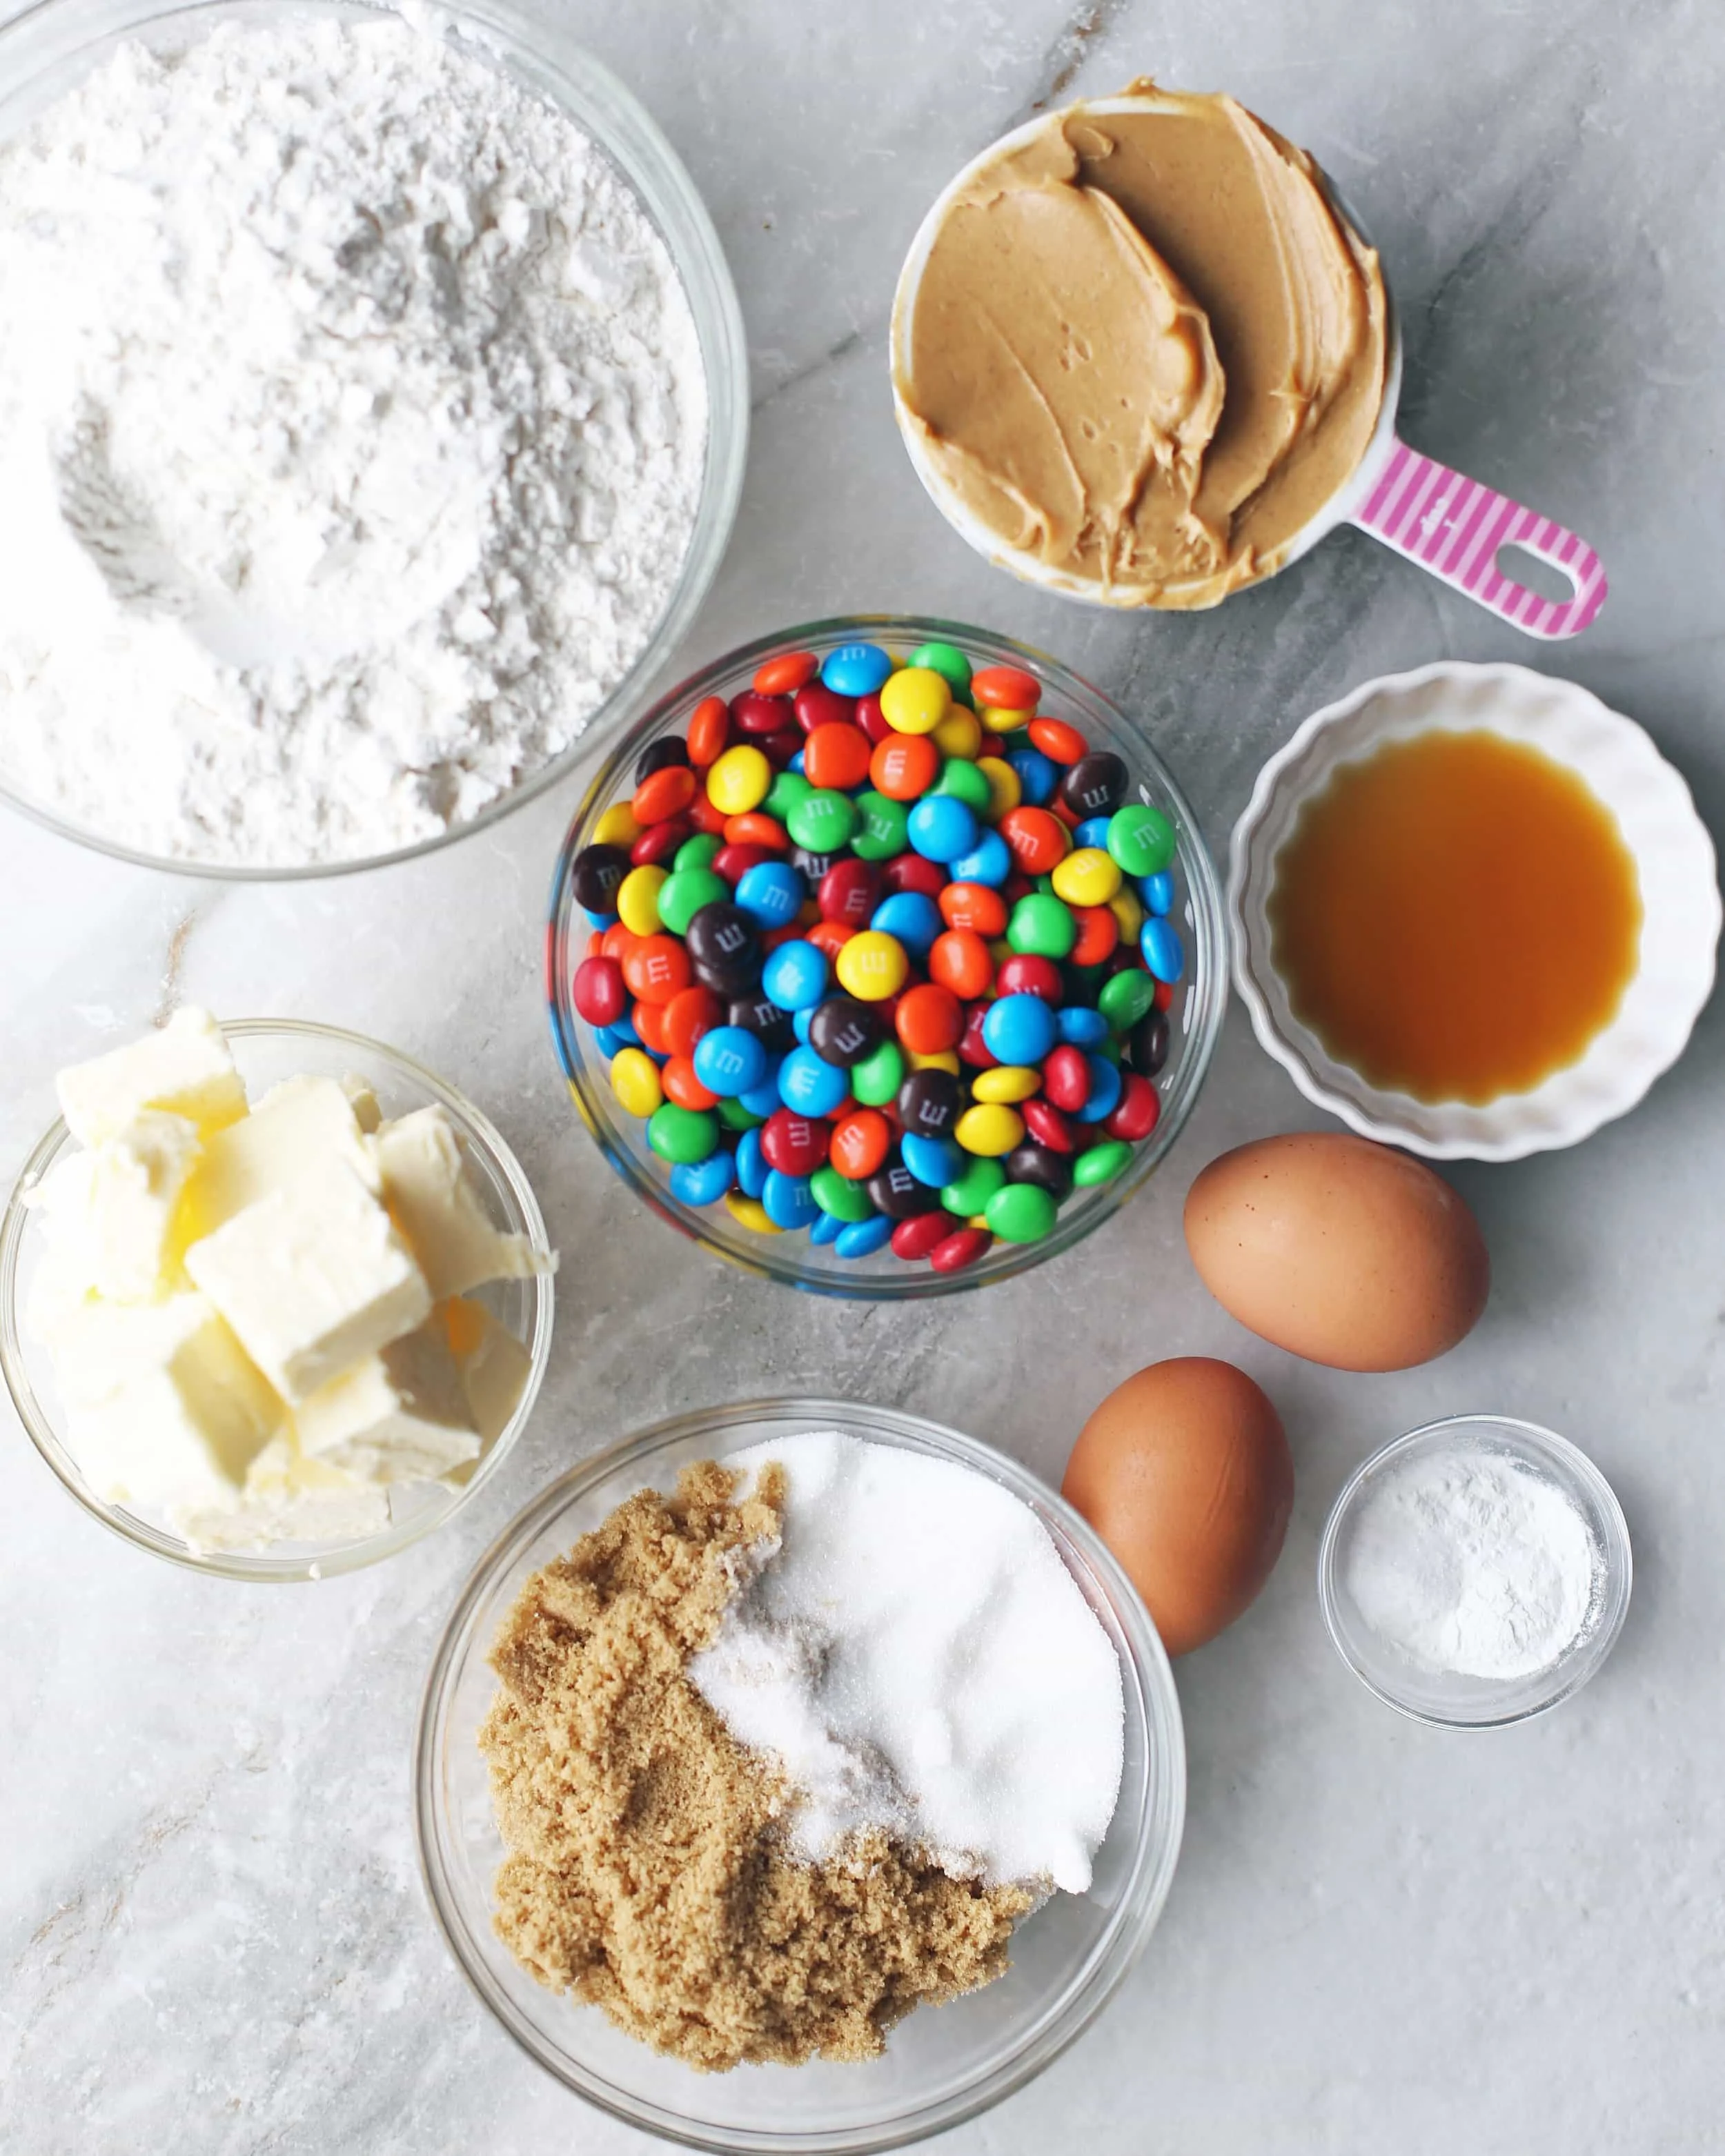 Overhead shot of glass bowls filled with white and brown sugar, butter, flour, peanut butter, vanilla extract, M&M's, eggs, salt, and baking powder.